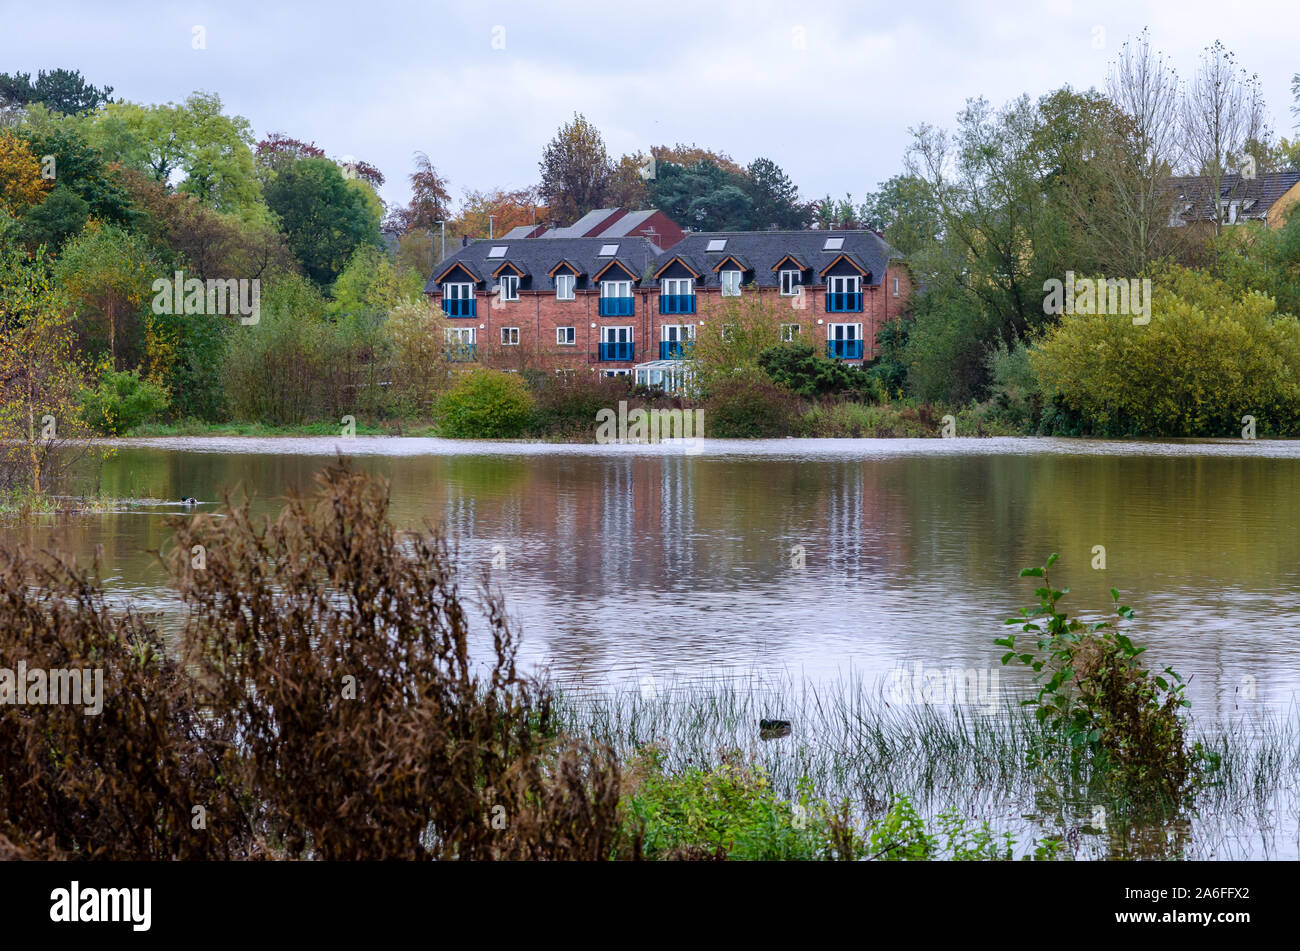 Flood in Staffordshire town Stone, UK. The river Trent flooded the roads and The Crown Meadow. Some cars were drown in water. Stock Photo